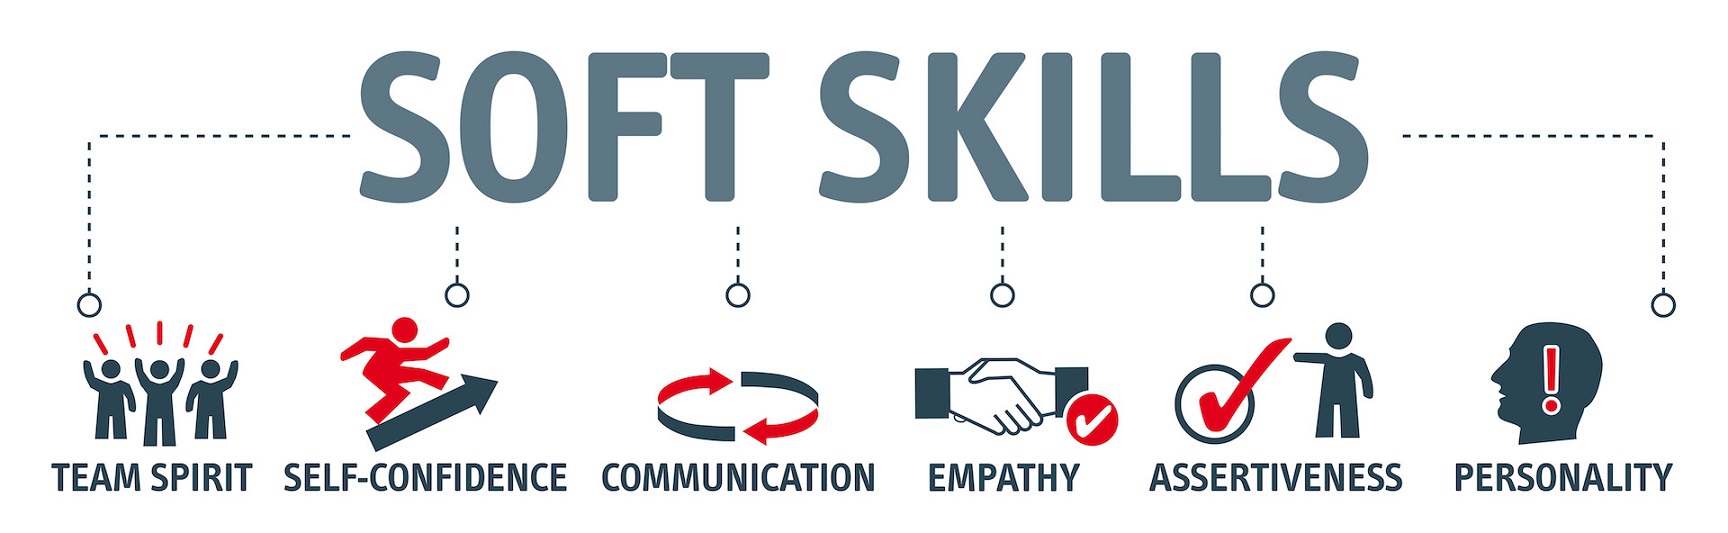 List of soft skills, we should focus on, for career growth.